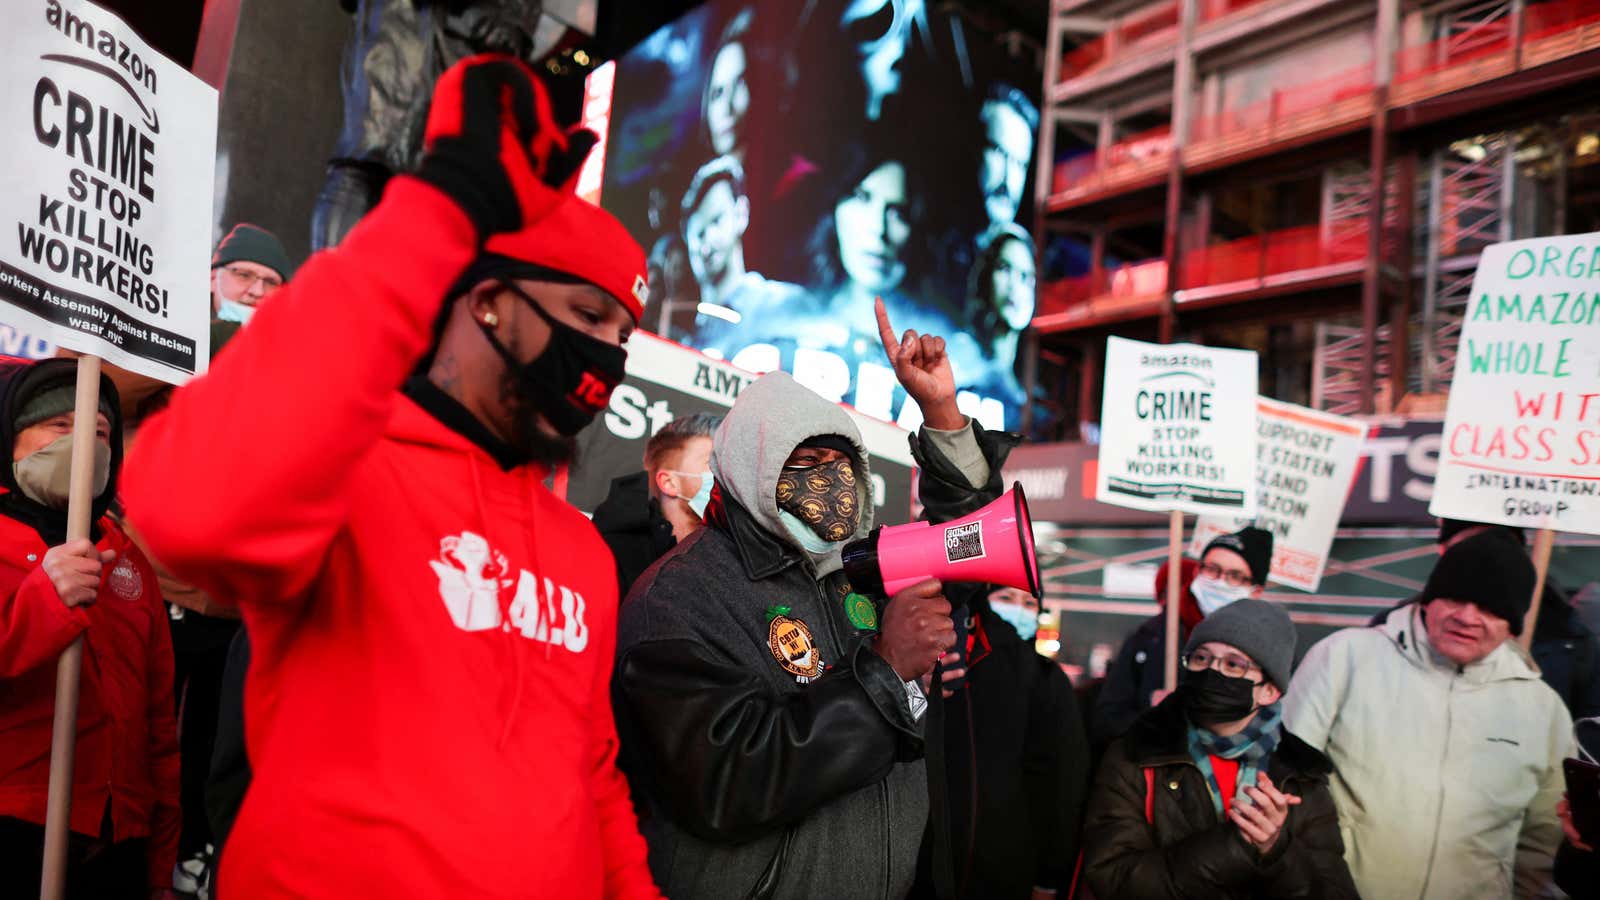 Amazon workers protest in Times Square.